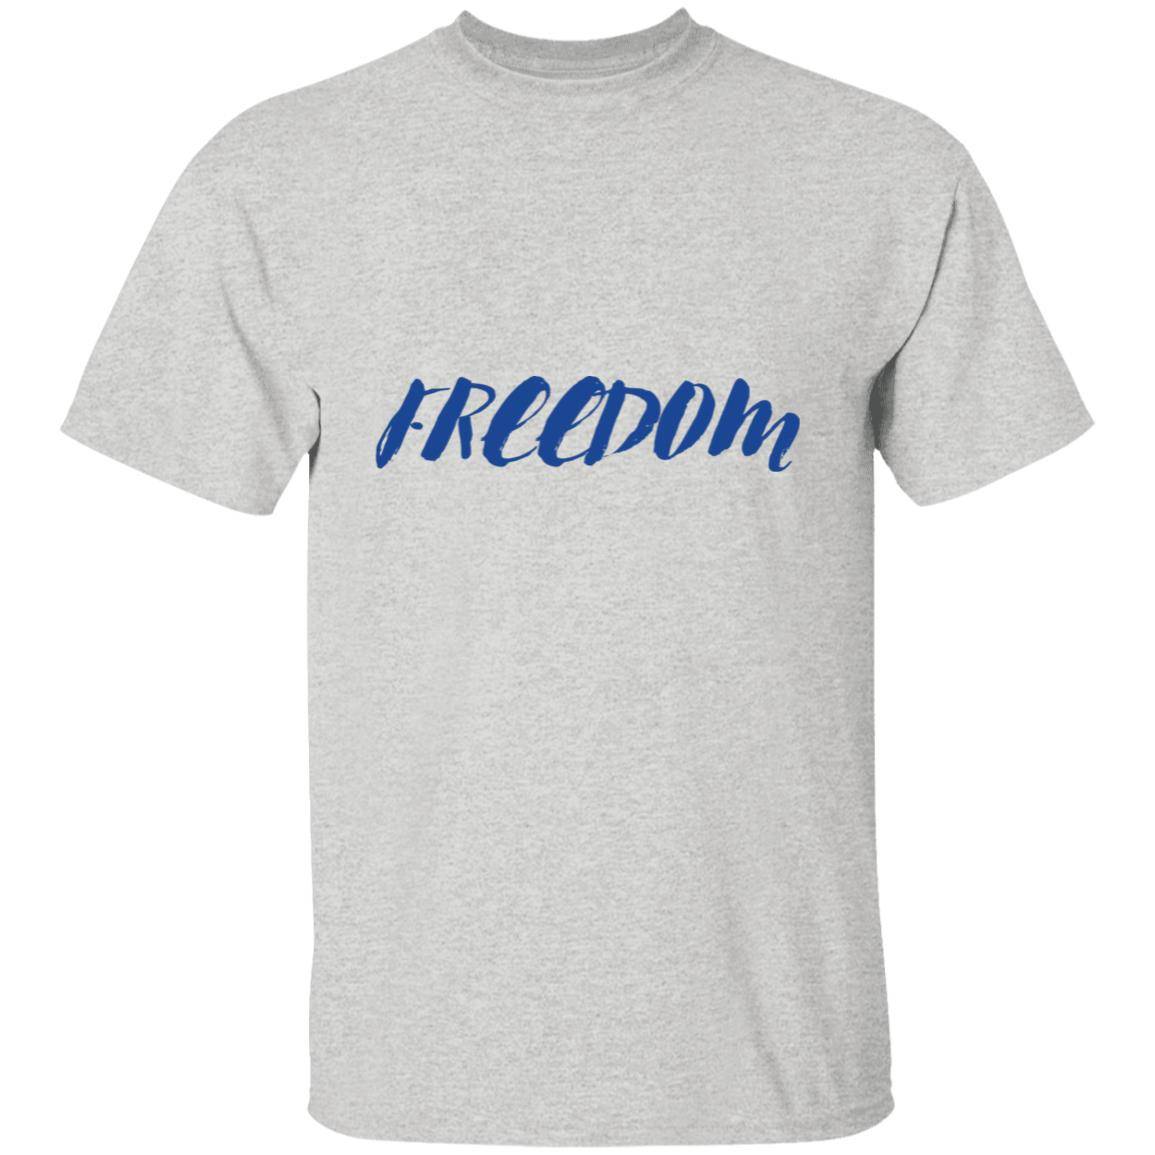 Ash gray, heavyweight classic unisex t-shirt in 100% cotton. Freedom is written across the chest front.